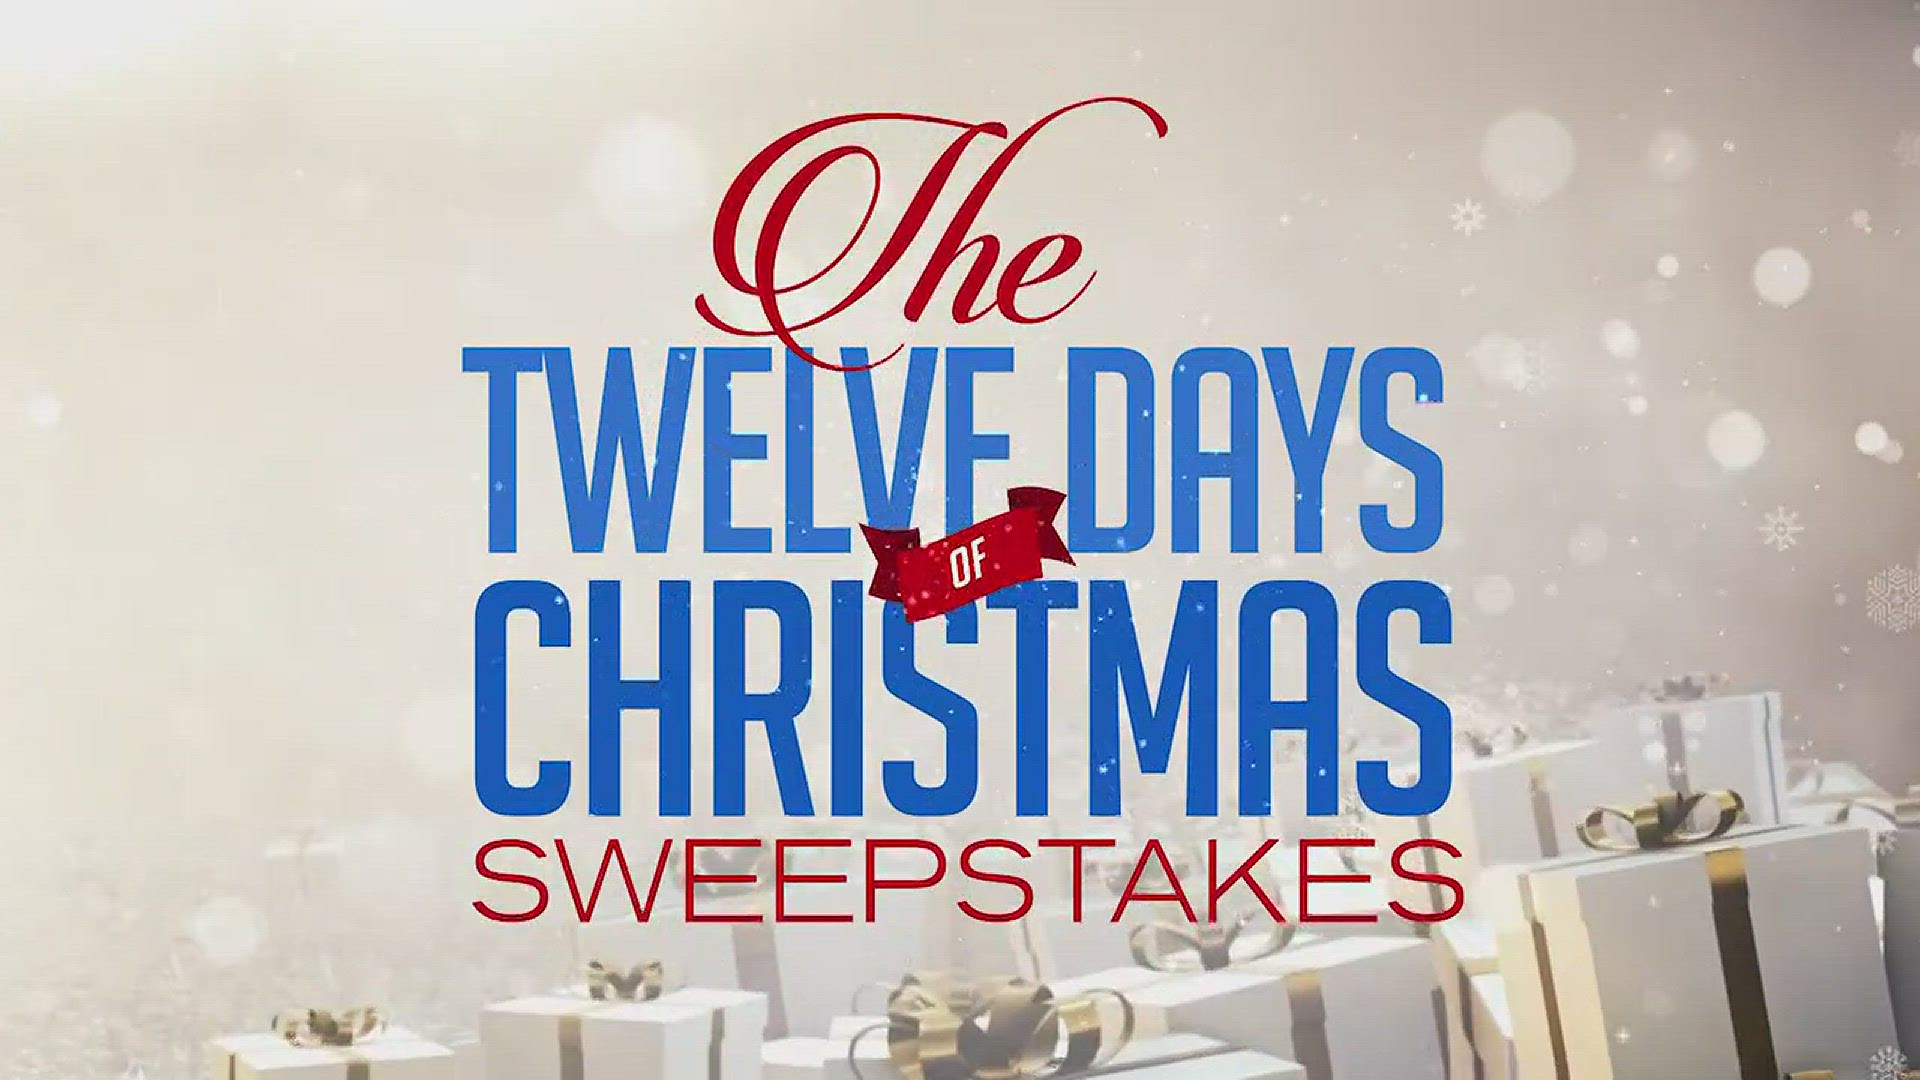 Enter the "12 Days of Christmas Sweepstakes" for a chance to win a $100 Academy Sports + Outdoors gift card for the sports enthusiast in your household. Twelve winners in all - one winner randomly selected each day for twelve days.